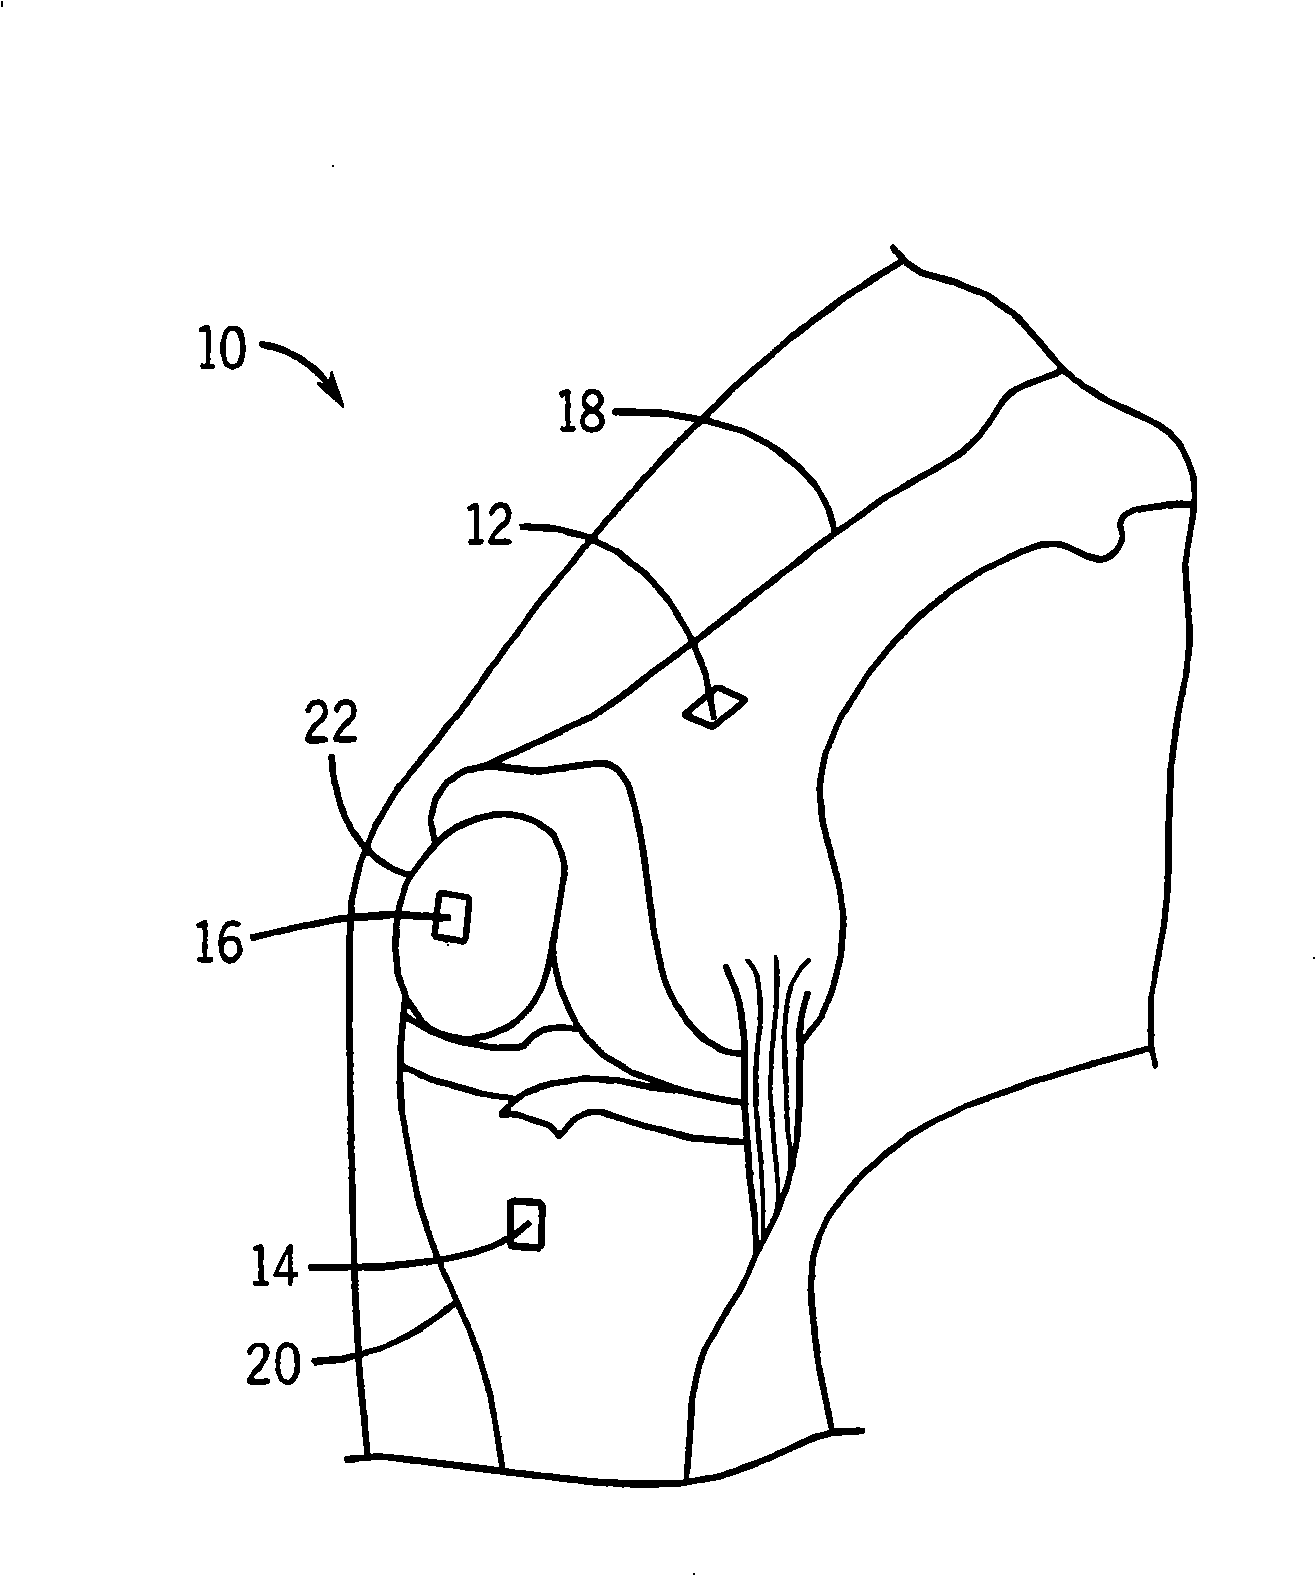 System and method for measurement of clinical parameters of the knee for use during knee replacement surgery